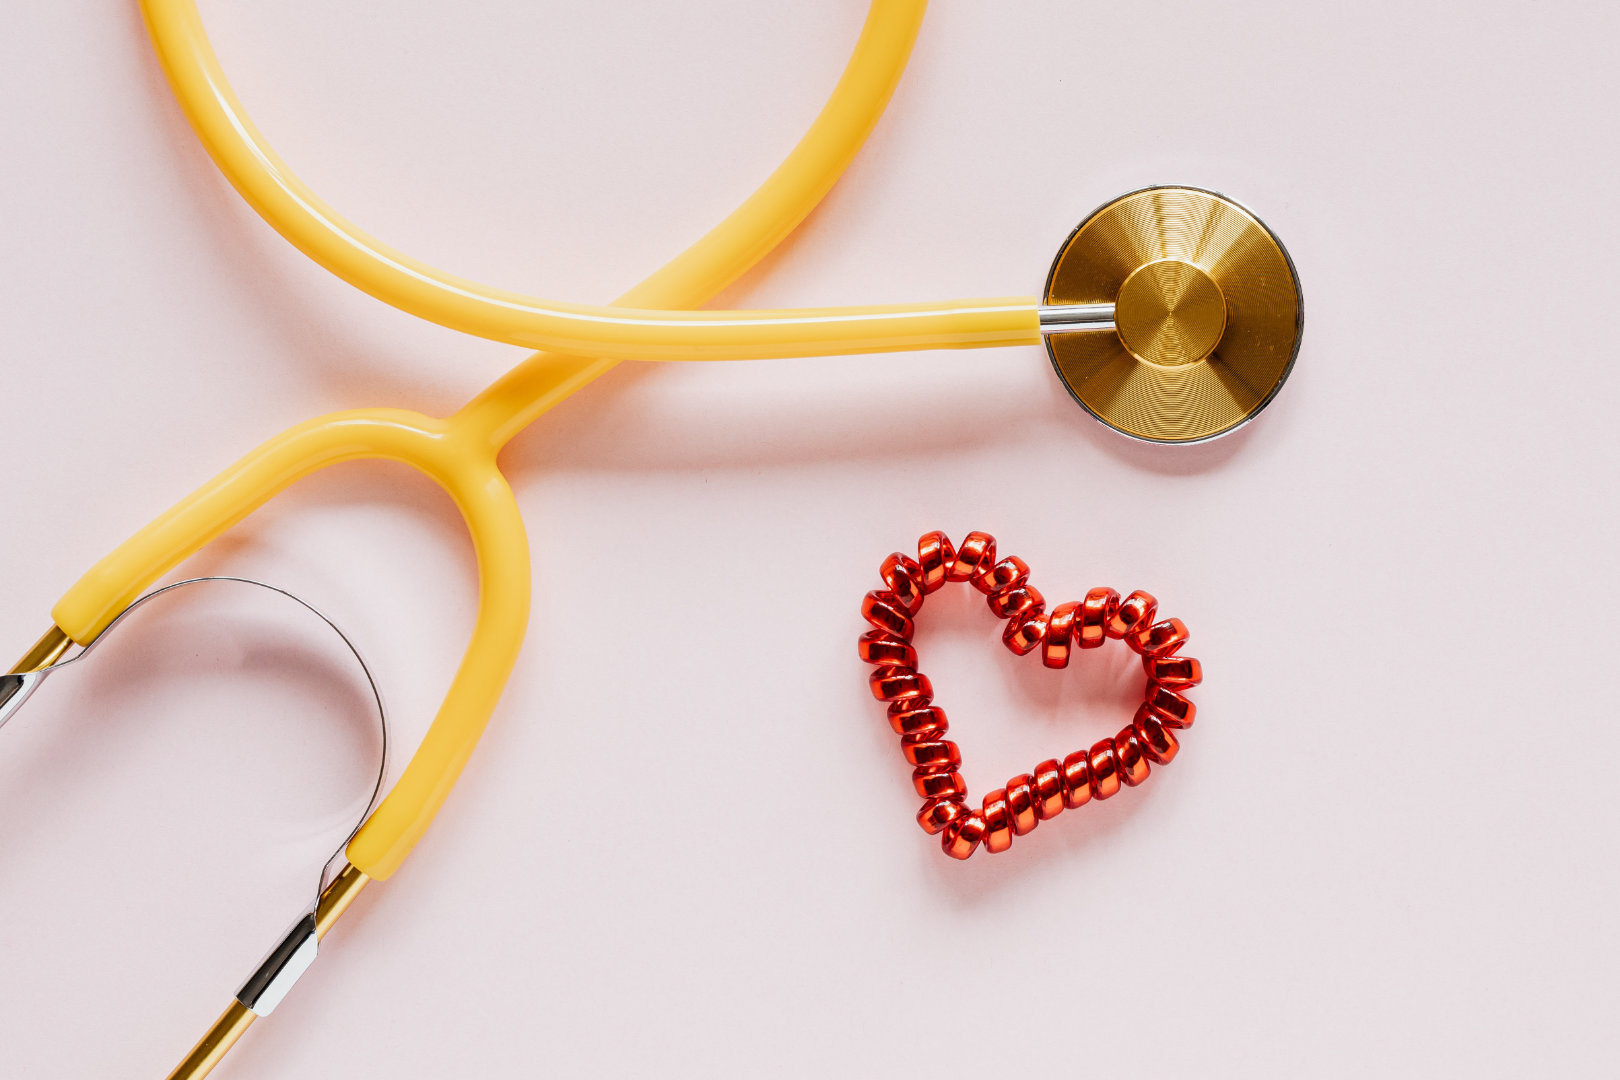 Yellow Stethoscope with a little heart made out of ribbons next to it